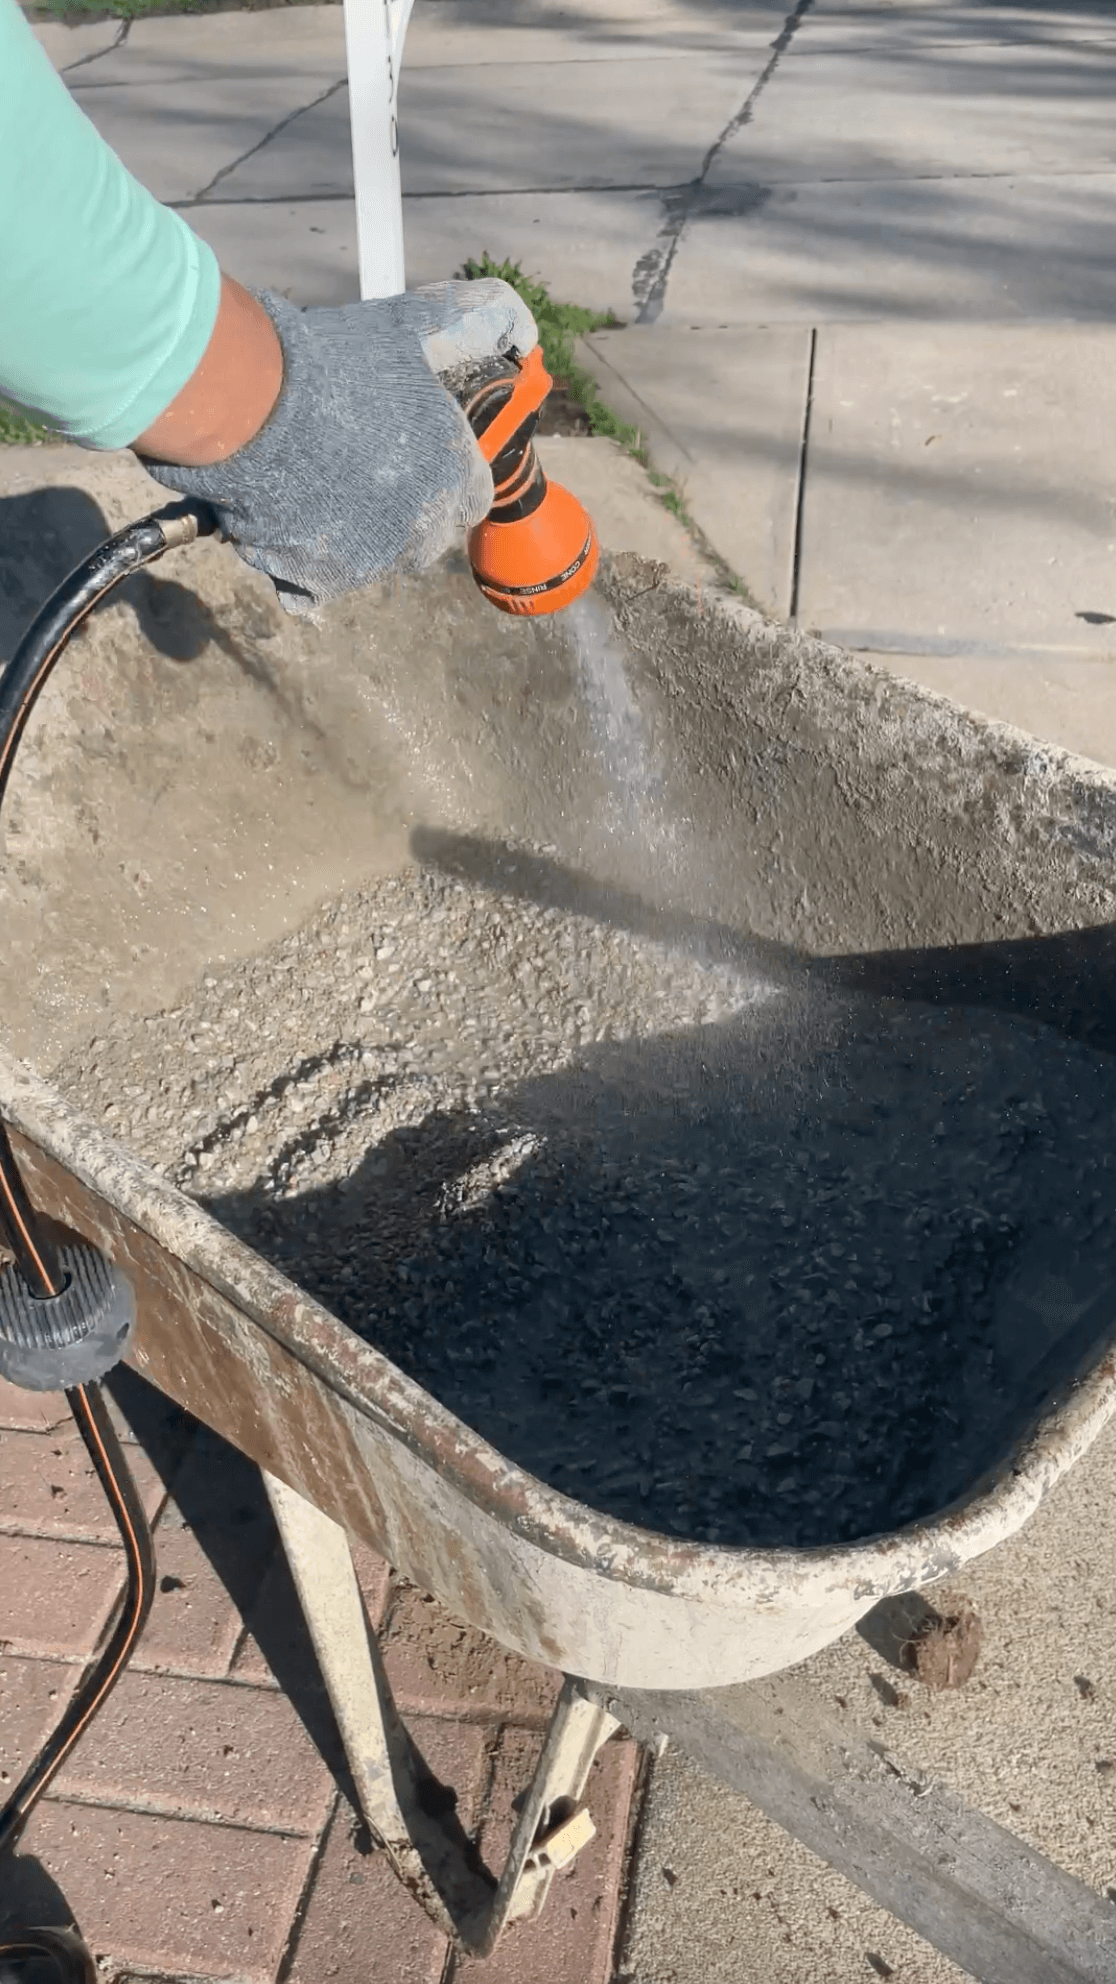 Adding water to mix concrete in a wheel barrow.